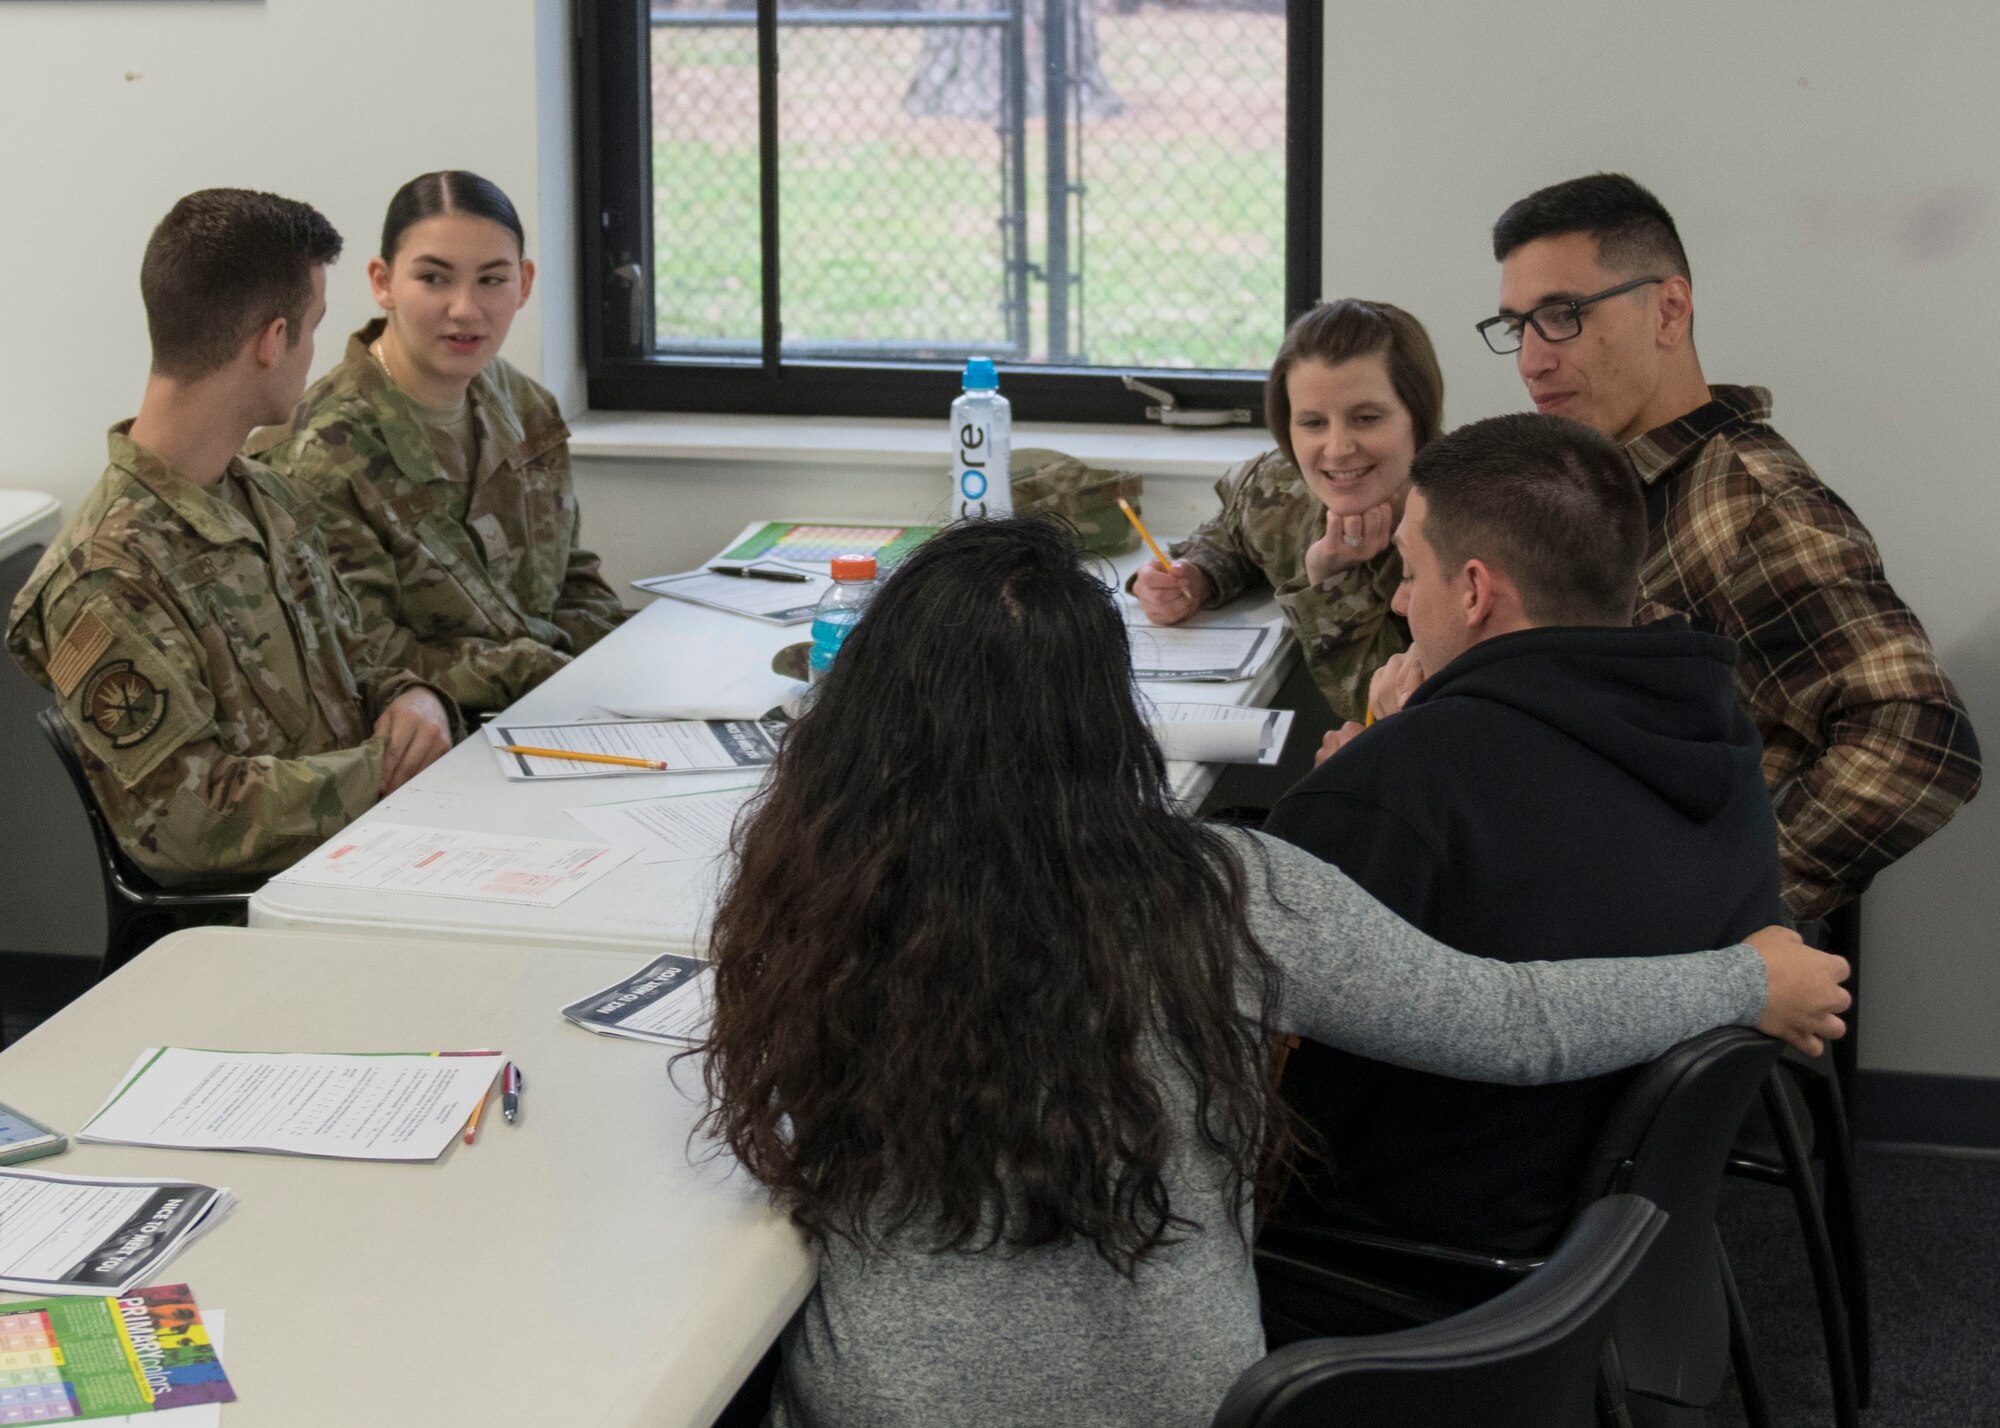 Airmen and their spouses introduce themselves during a Couples Communication course, Feb. 12, 2020, at Seymour Johnson Air Force Base, N.C.